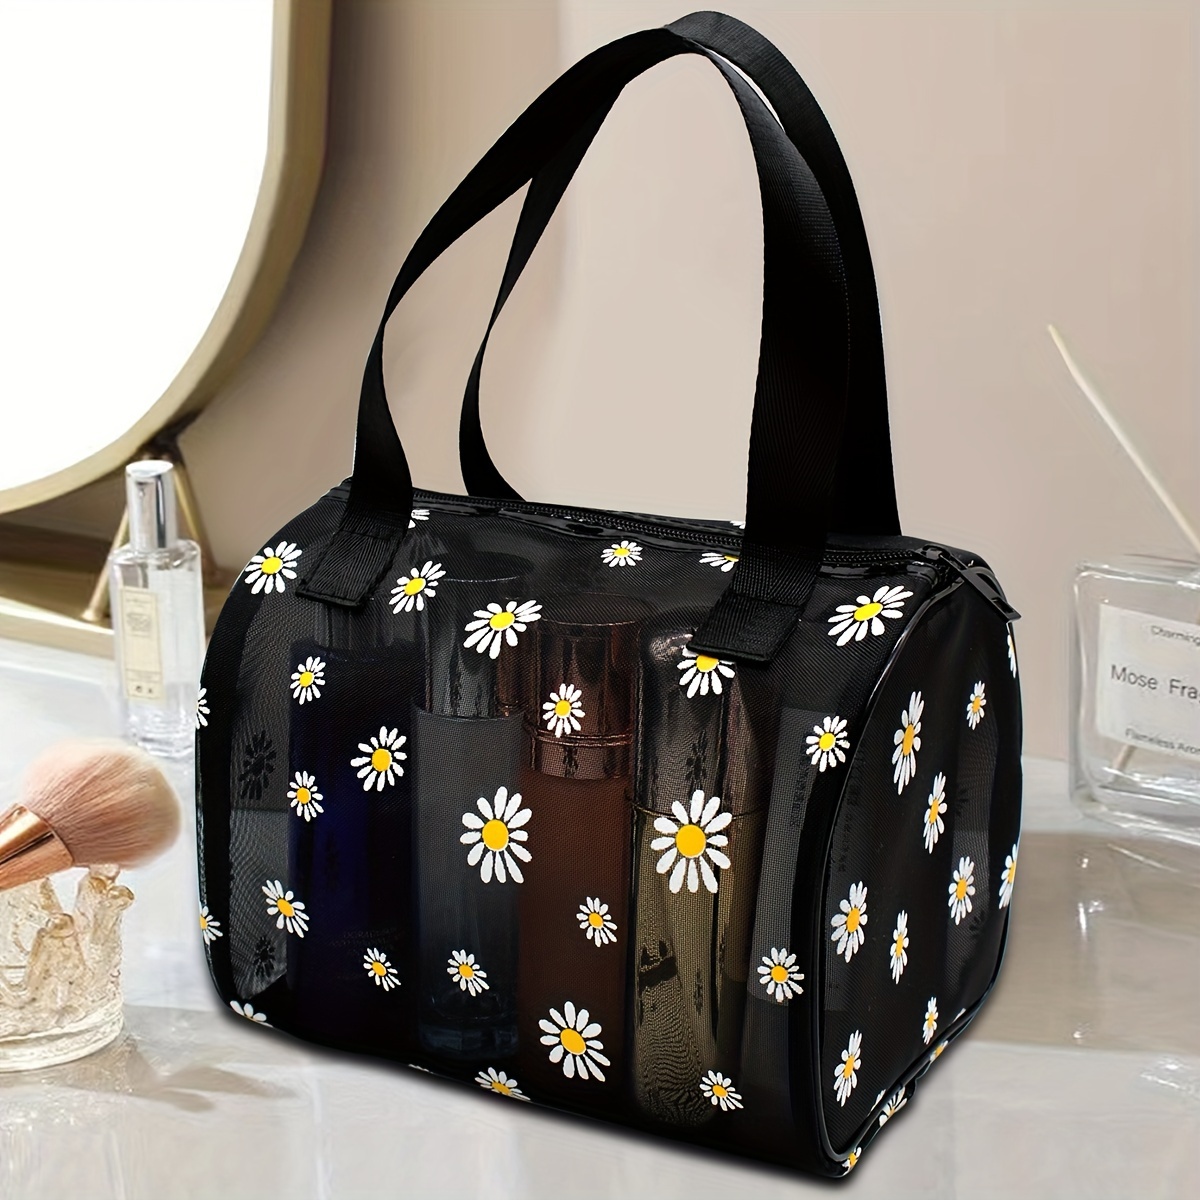 

Large Capacity Mesh Tote Bag With Daisy Design, Portable Cosmetic Bag Suitable For Home & Travel Use, Makeup Organizer With Sturdy Handles